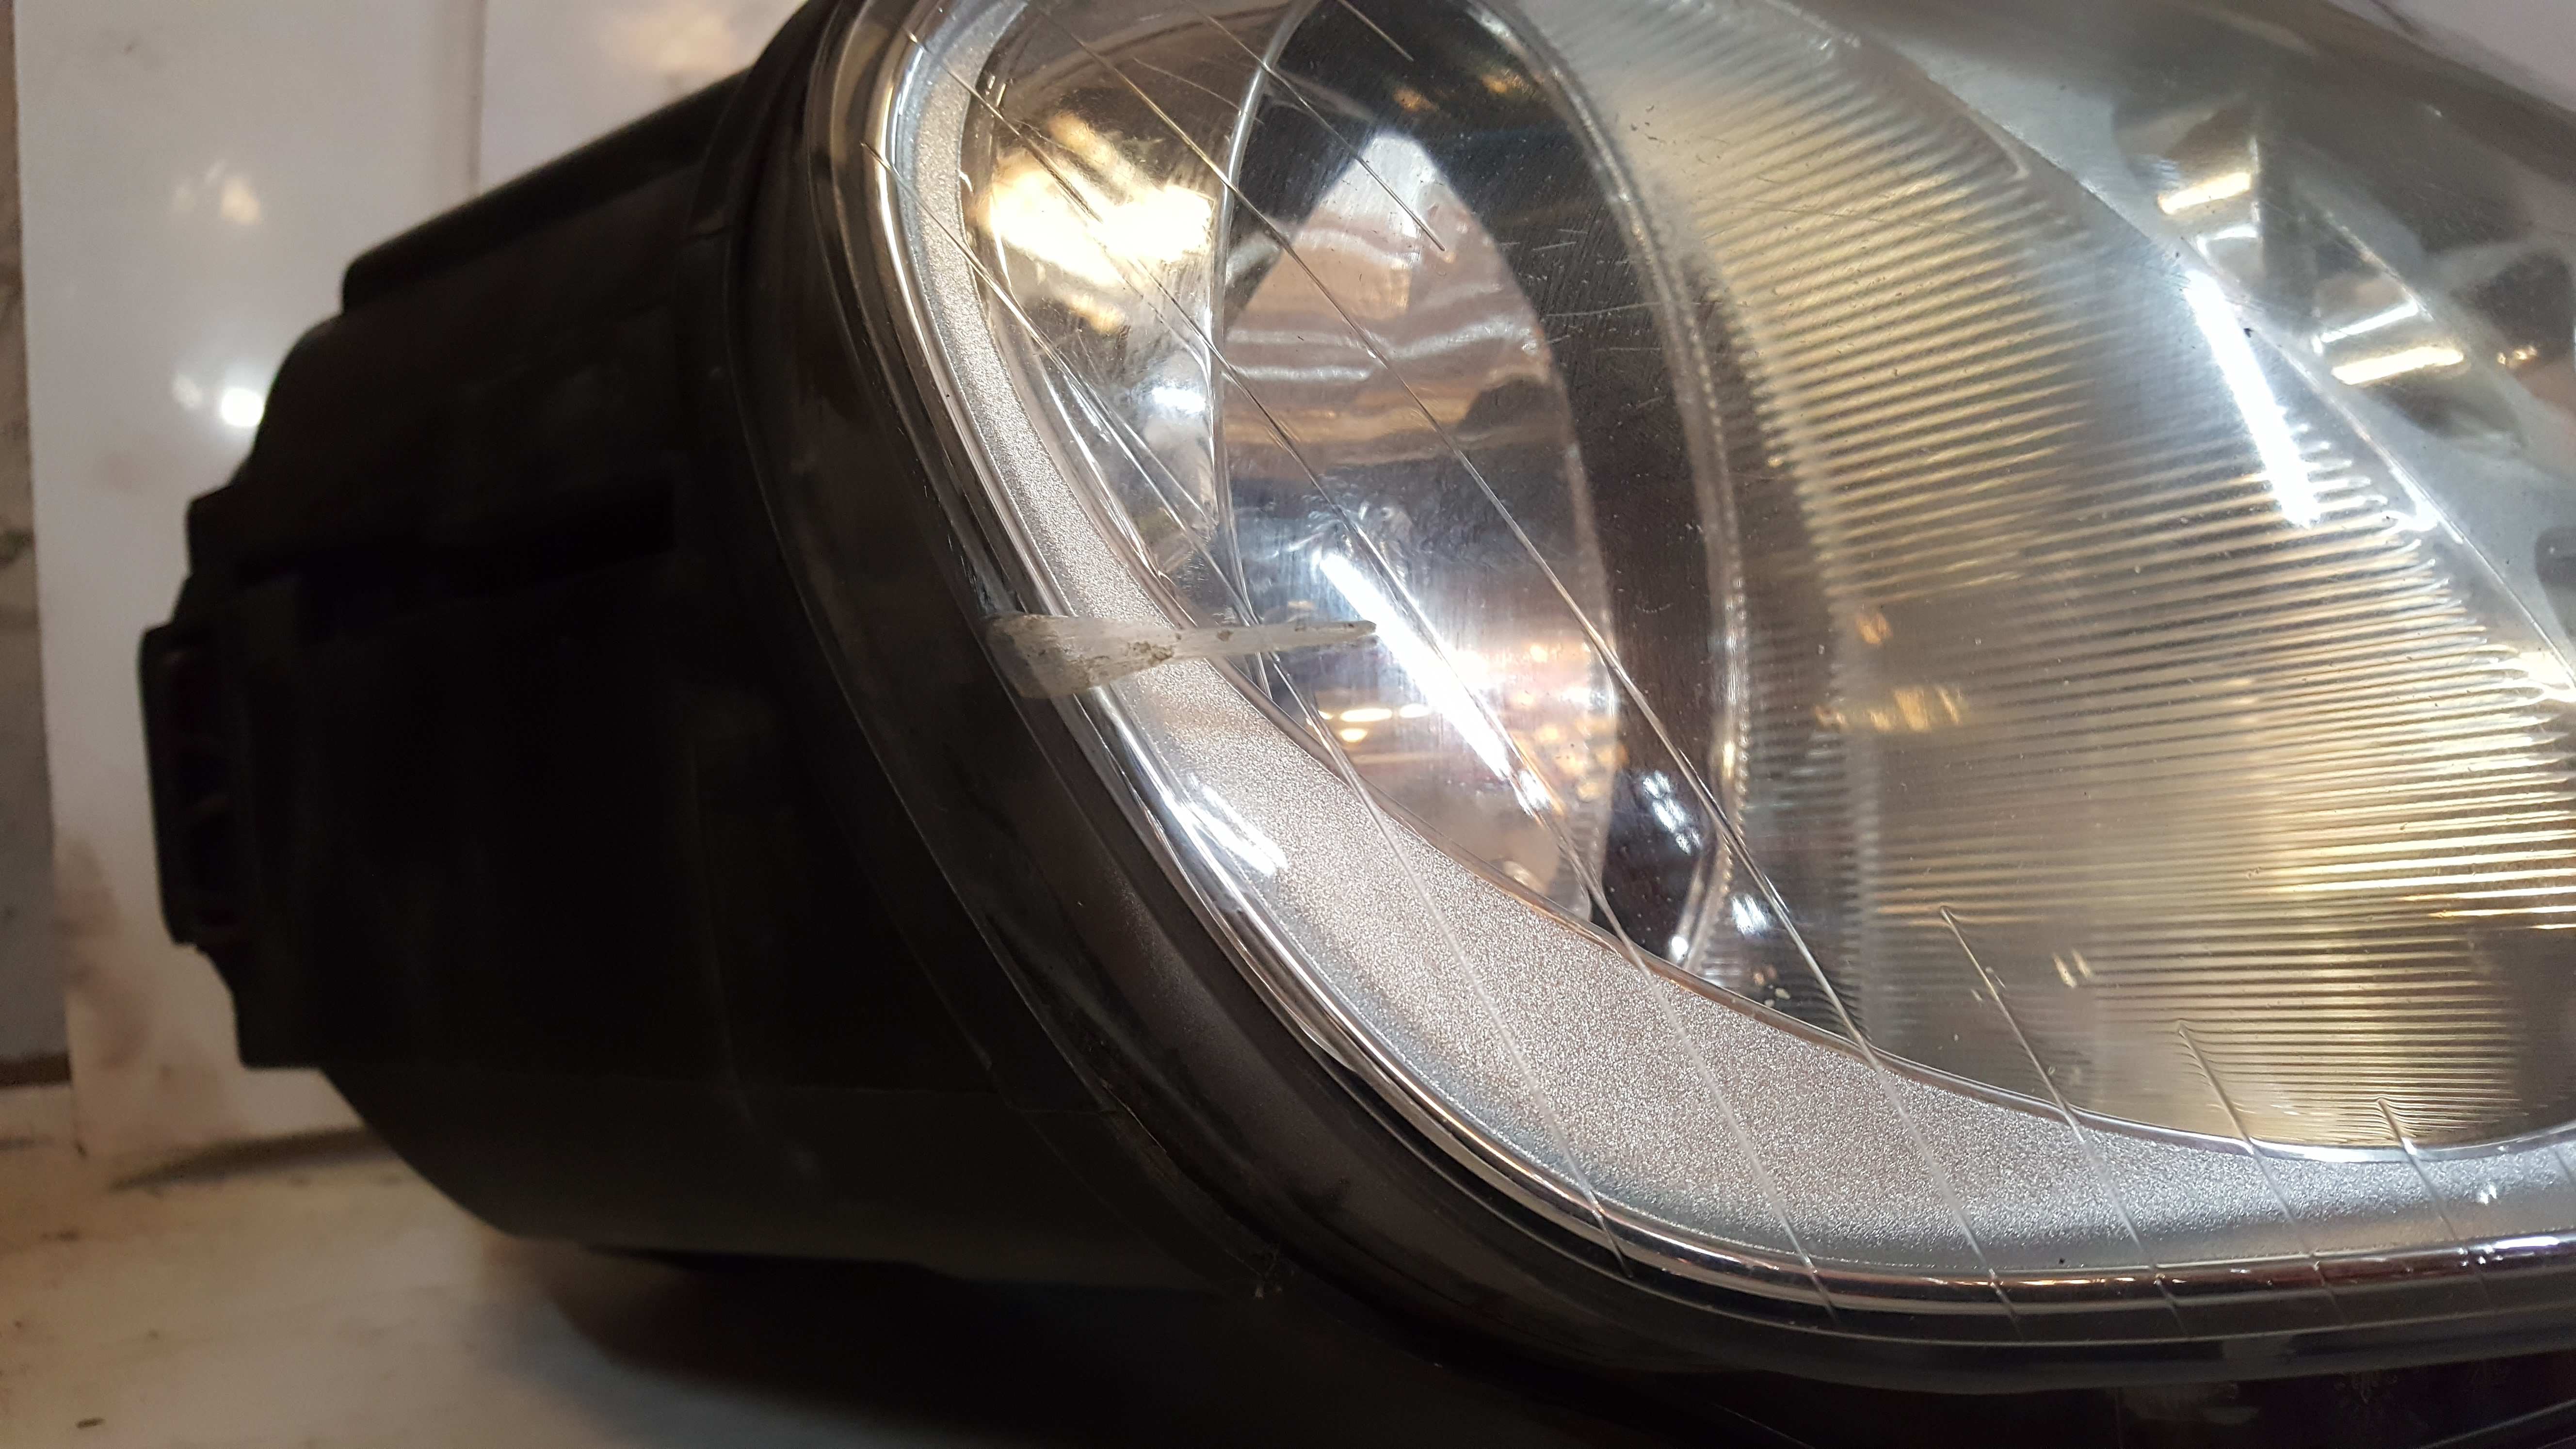 Volkswagen Touran 2003-2006 Drivers OSF Front Headlight 1T0941006e marks